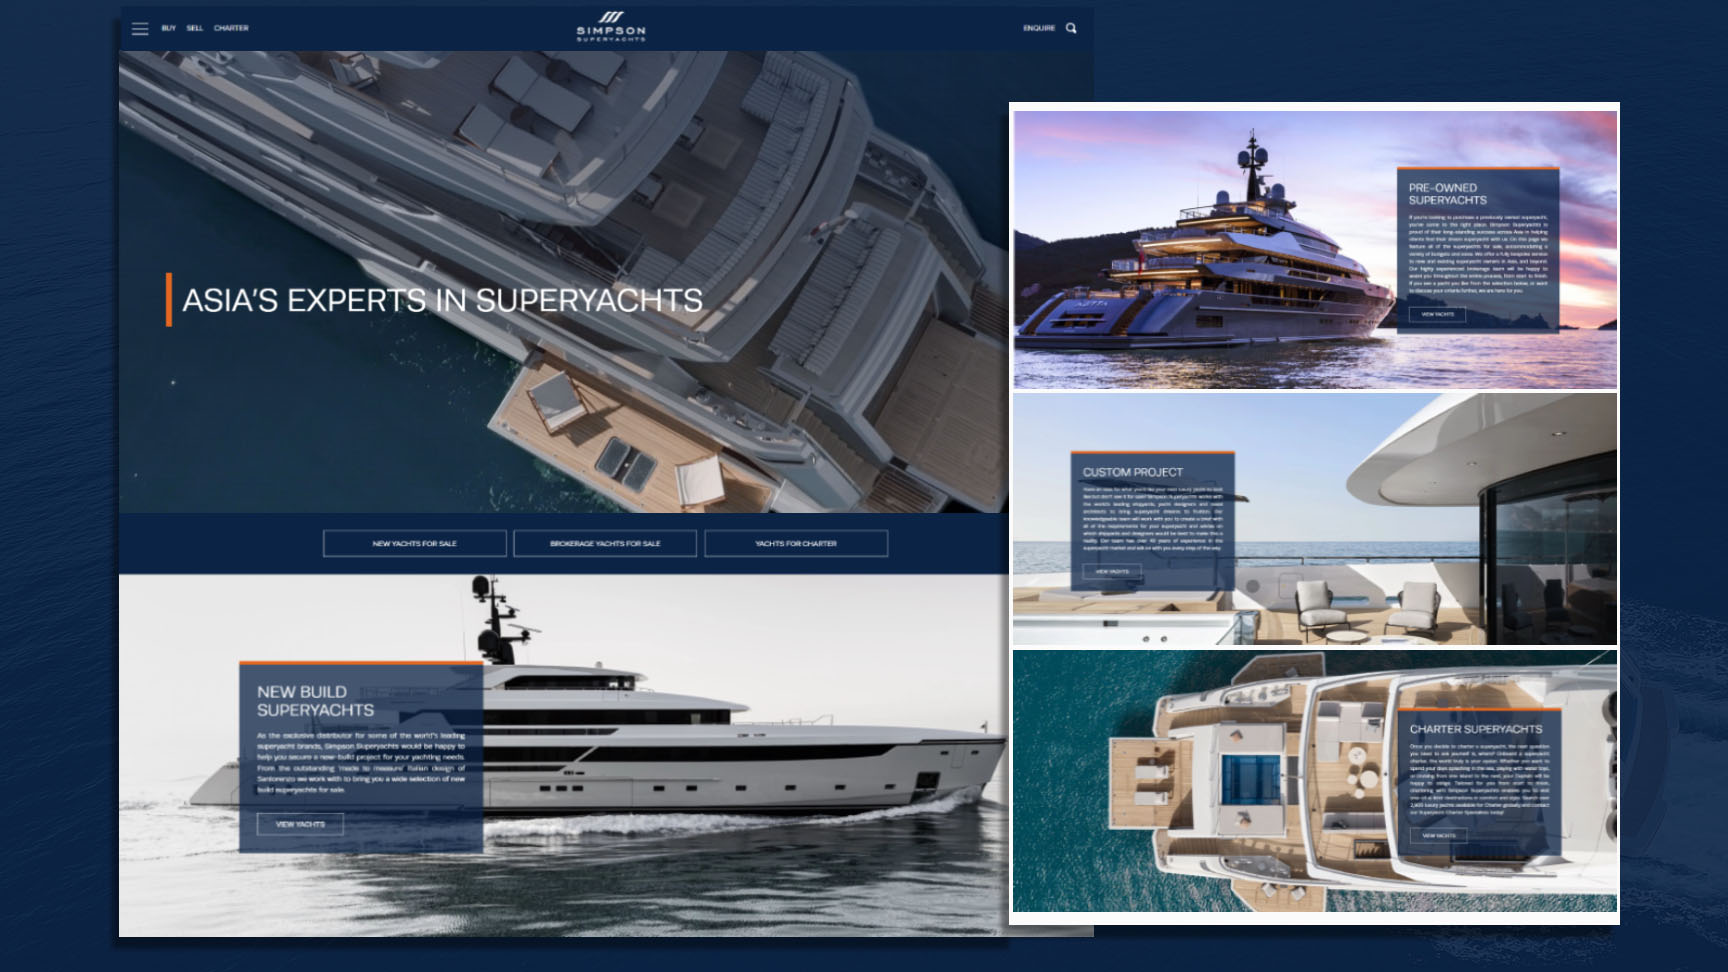 Simpson Superyachts Website Goes Live – Find The Most Unique Superyachts in Asia and Beyond